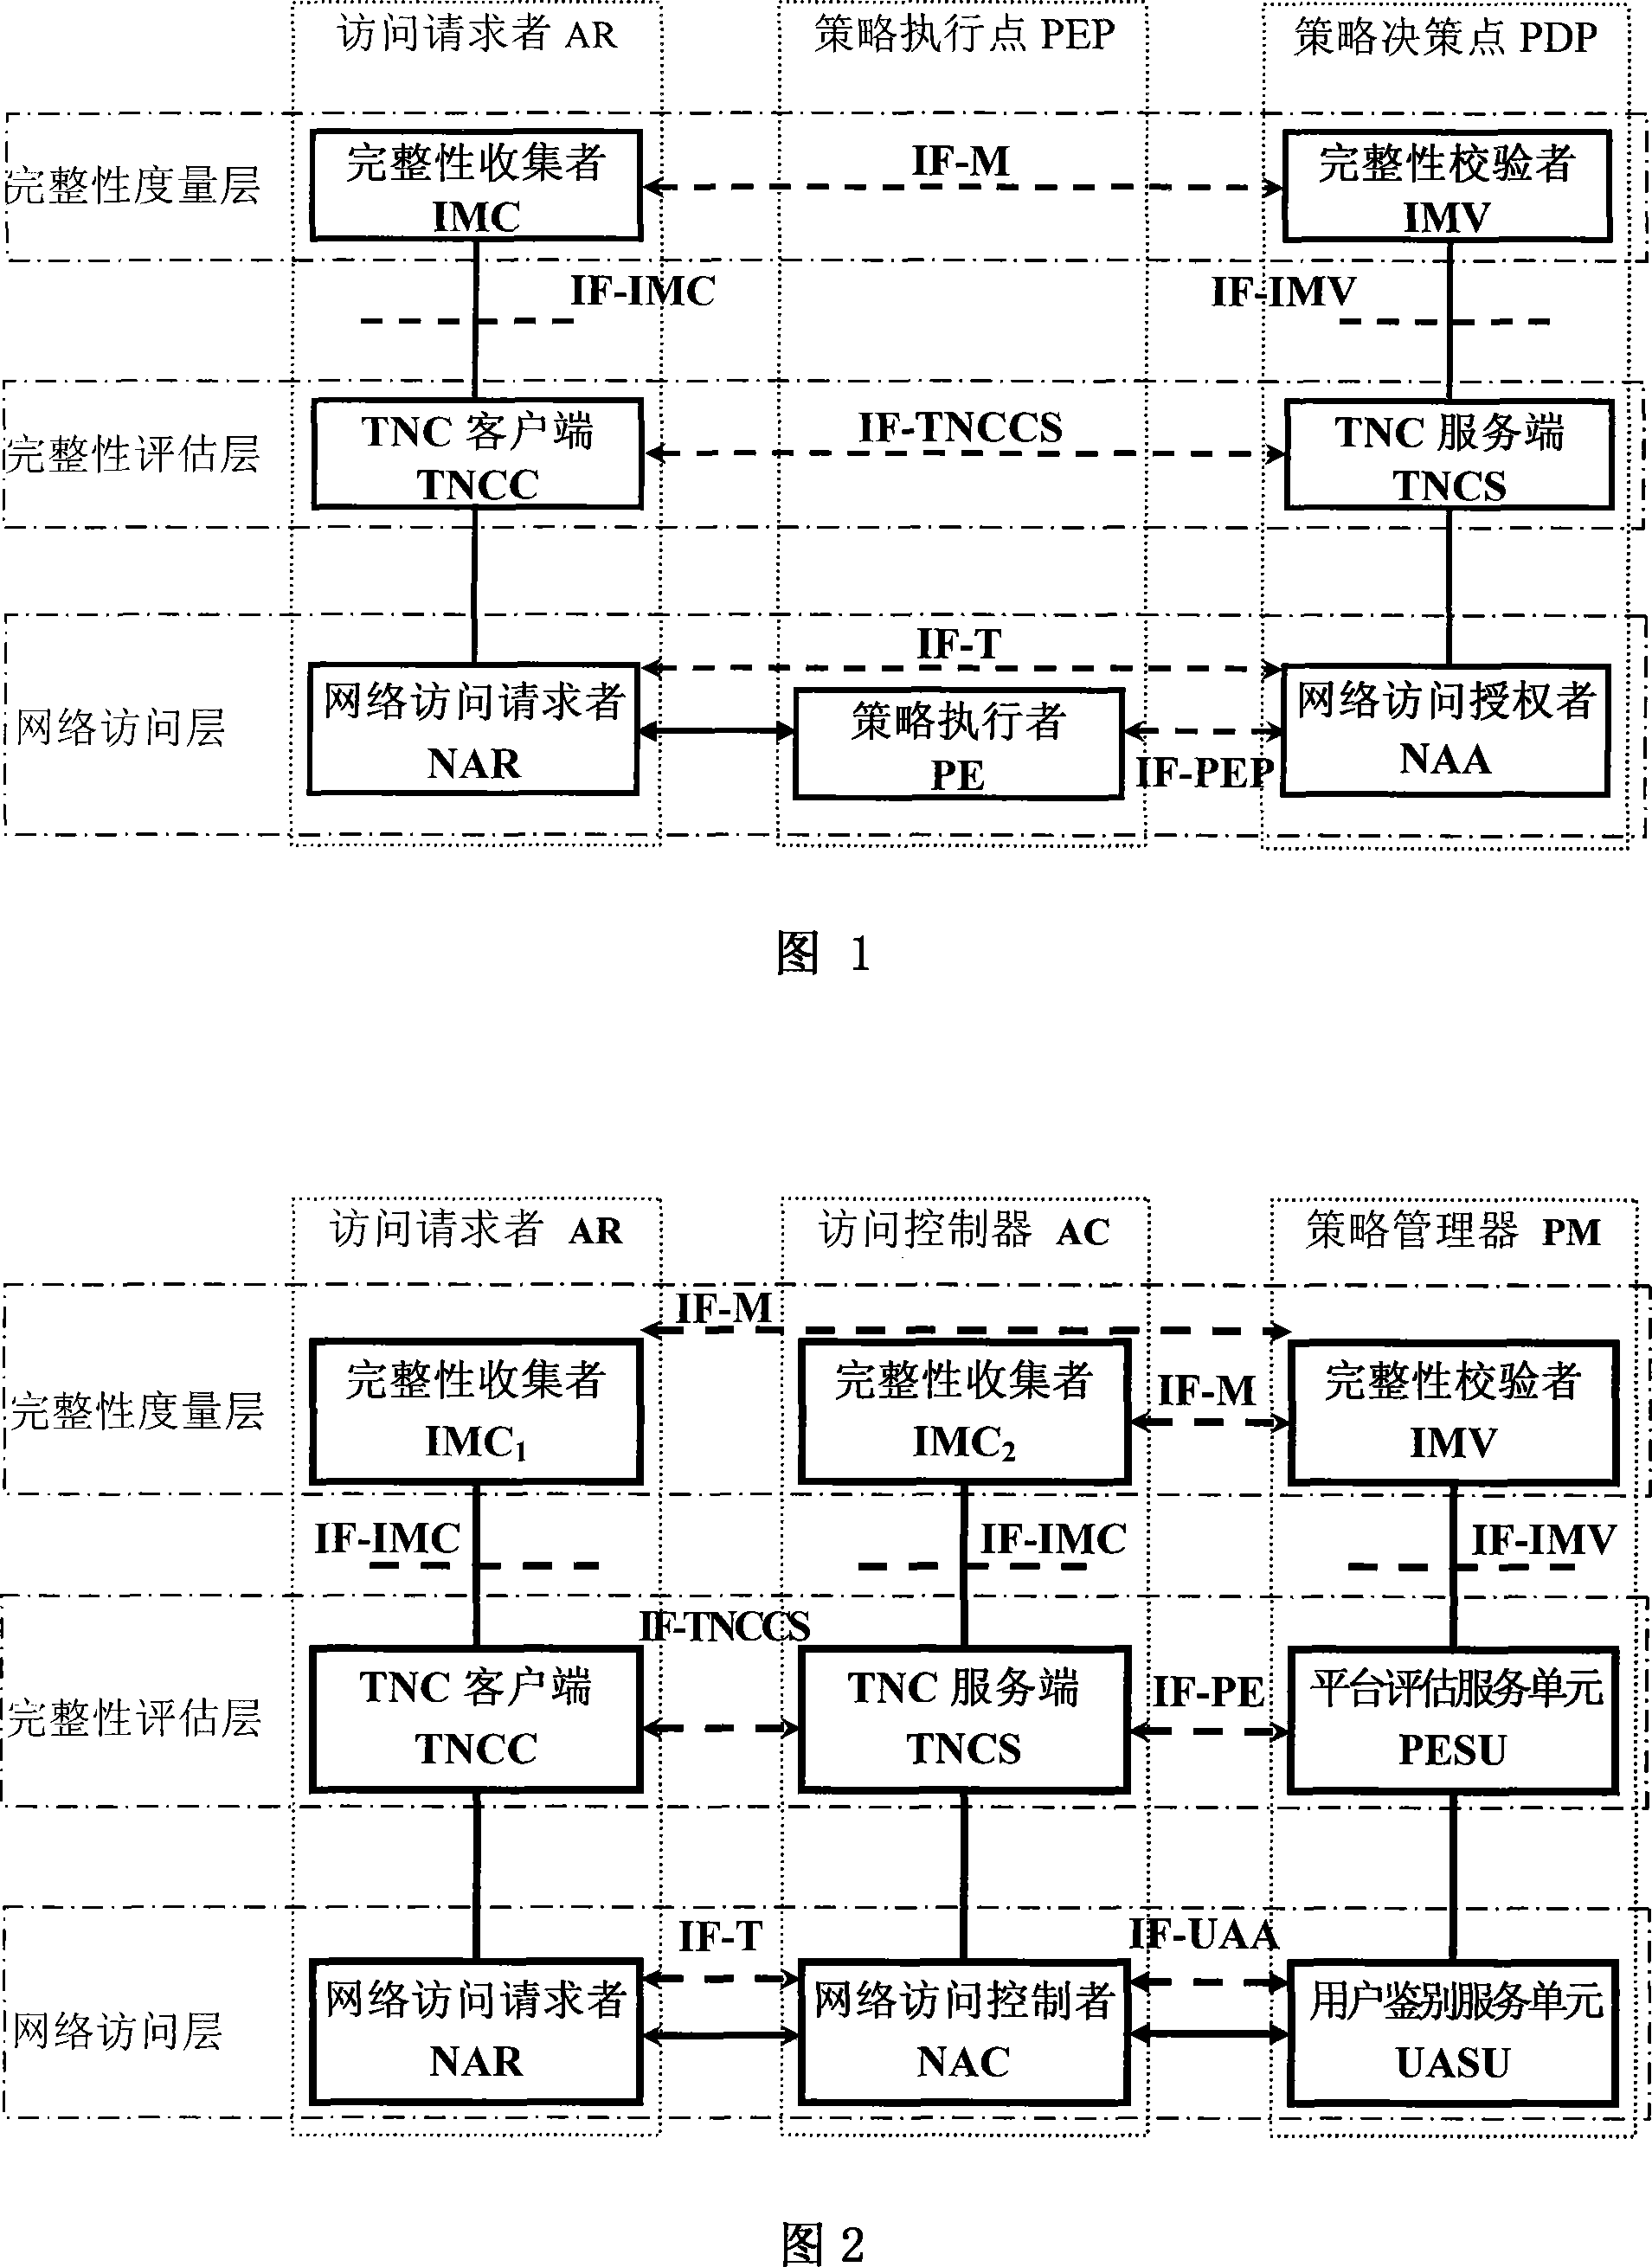 A trusted network connection system based on three-element peer authentication